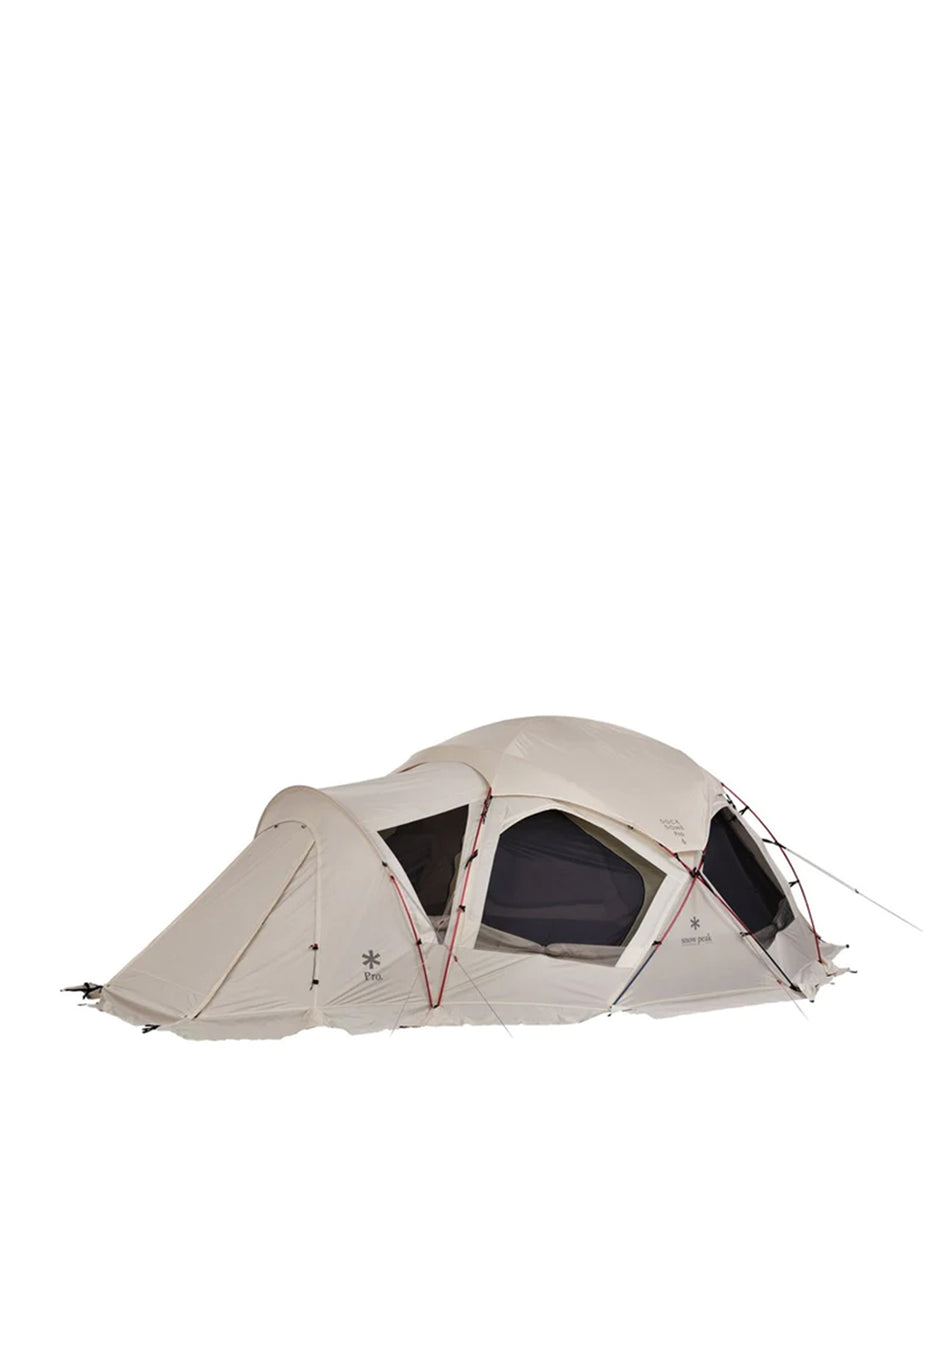 Snow Peak Dock Dome Pro. 6 Ivory Tent - First Camp Rental